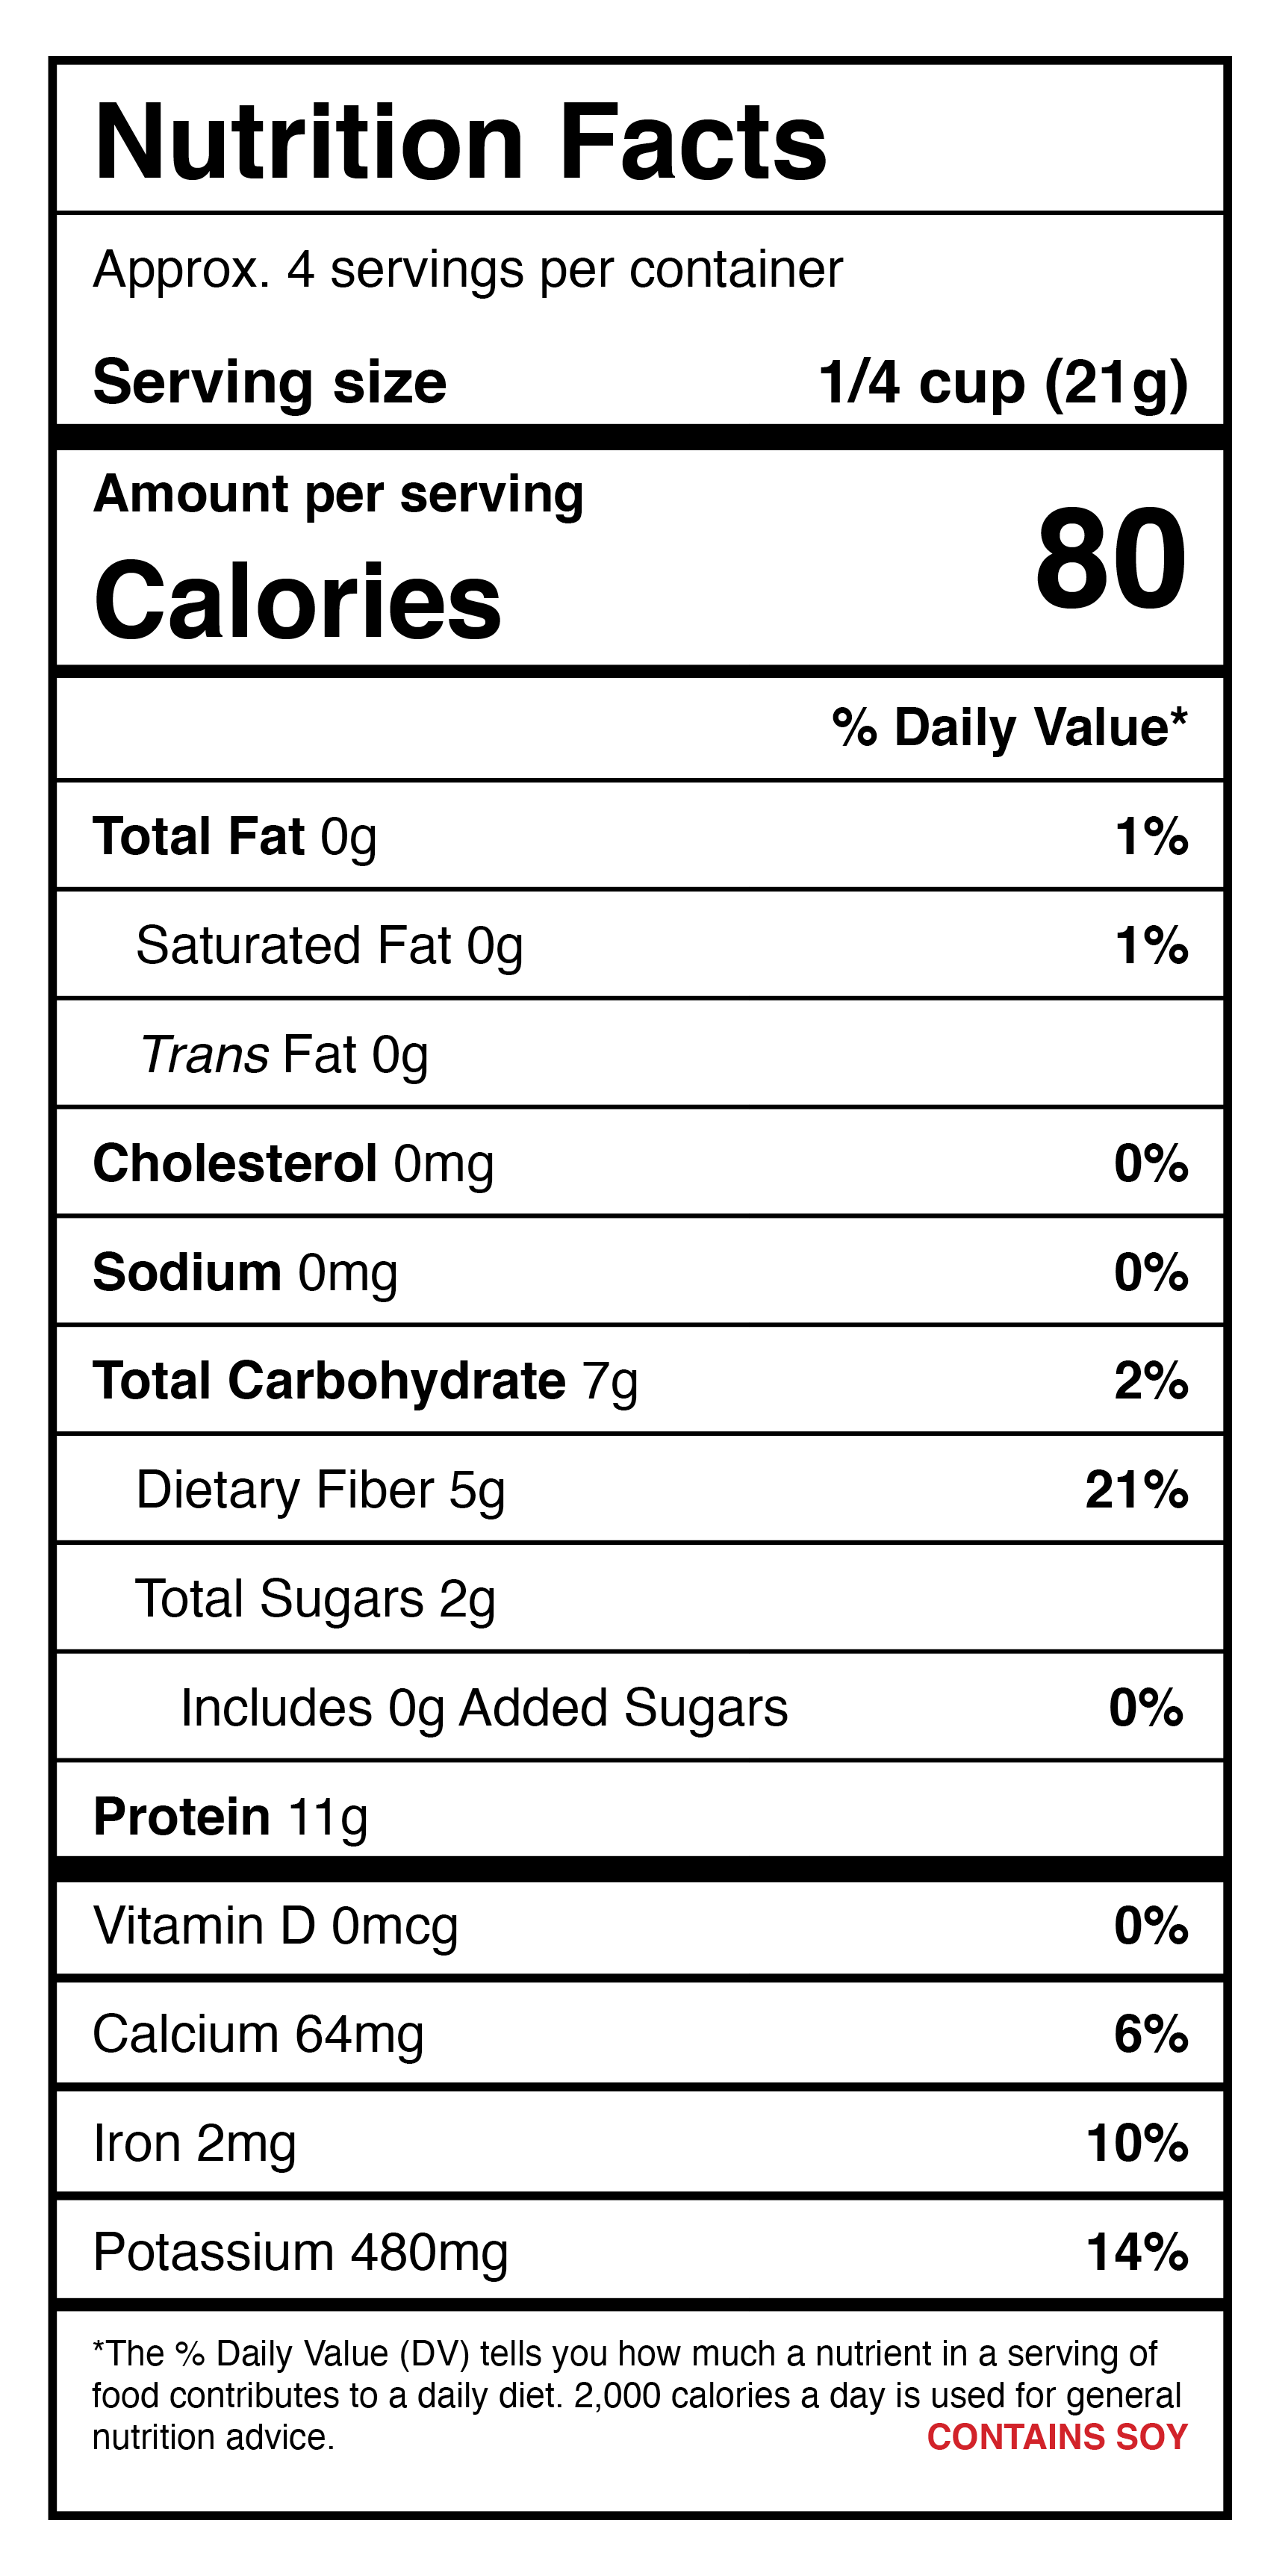 A nutrition label for Harmony House Chicken Style Bits protein shake.